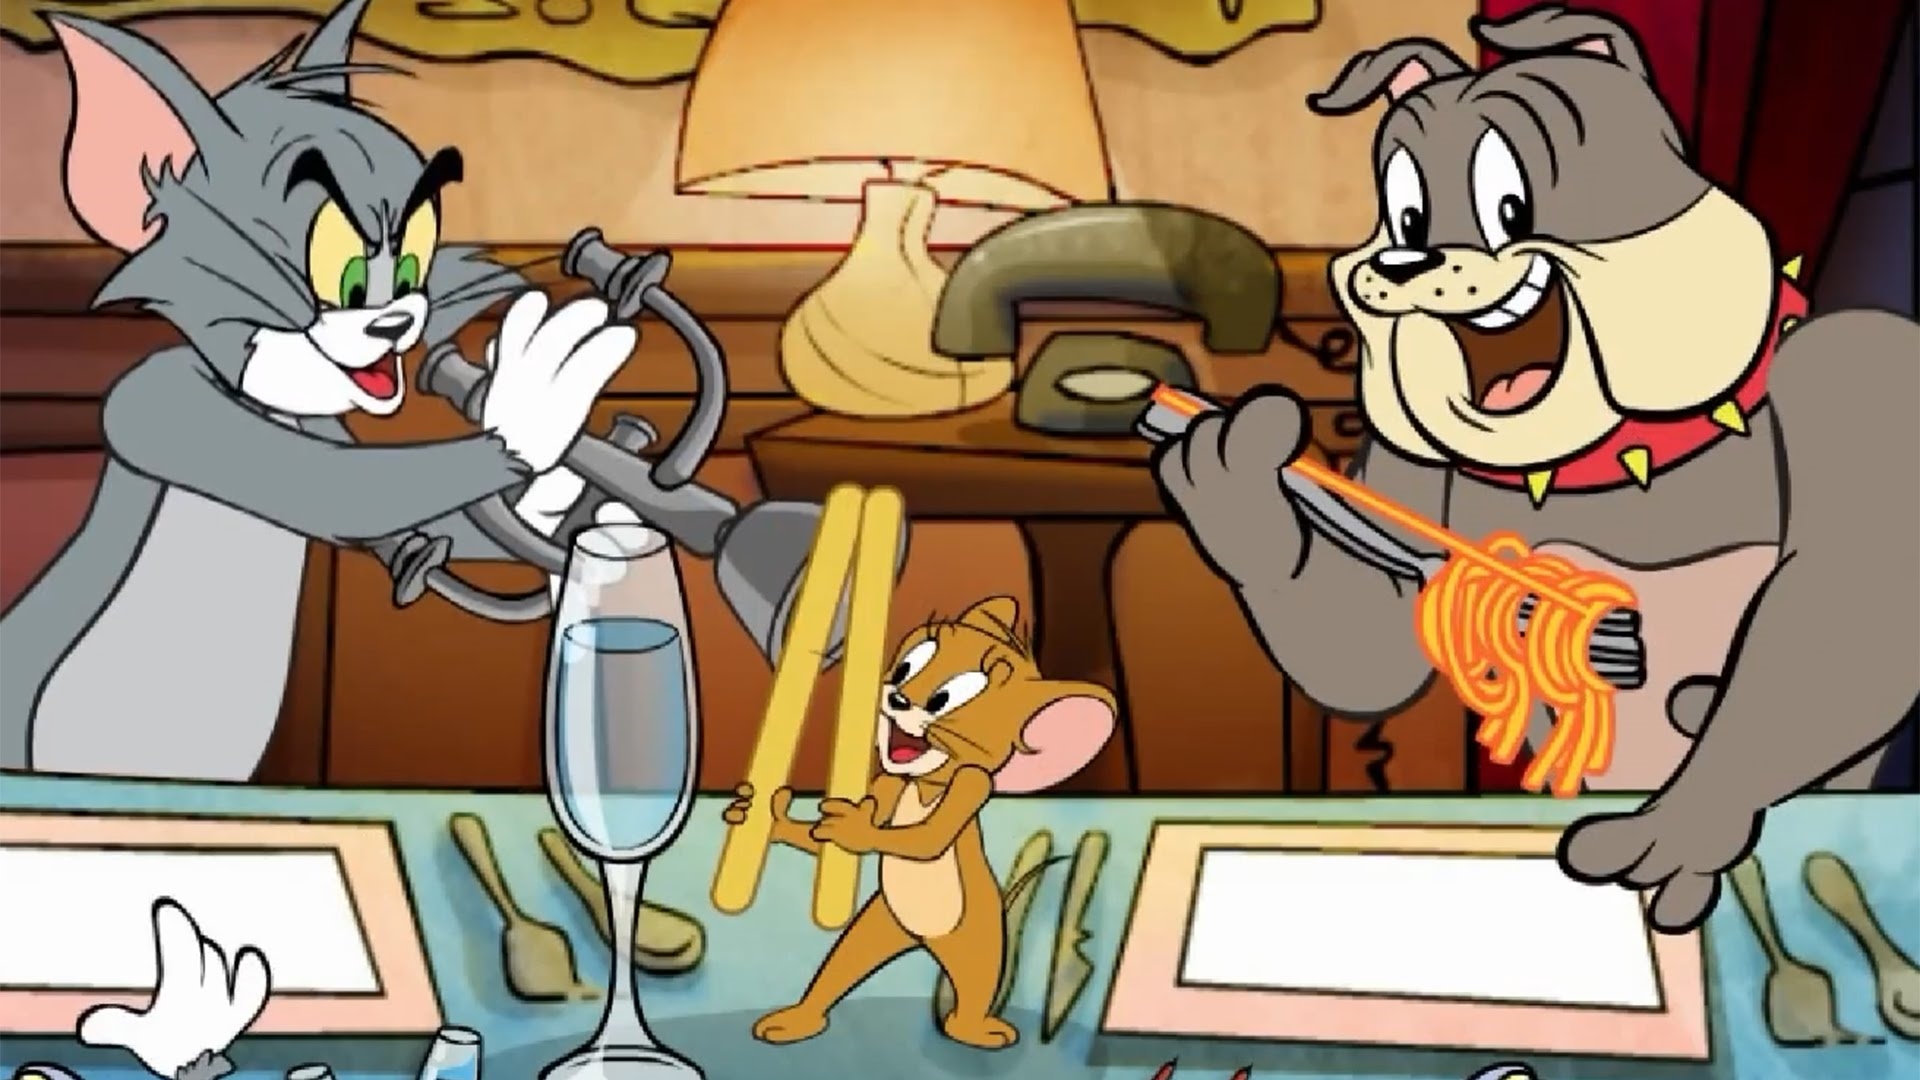 Stunning Tom And Jerry Images - Tom And Jerry Drawing Suppertime Serenade - HD Wallpaper 